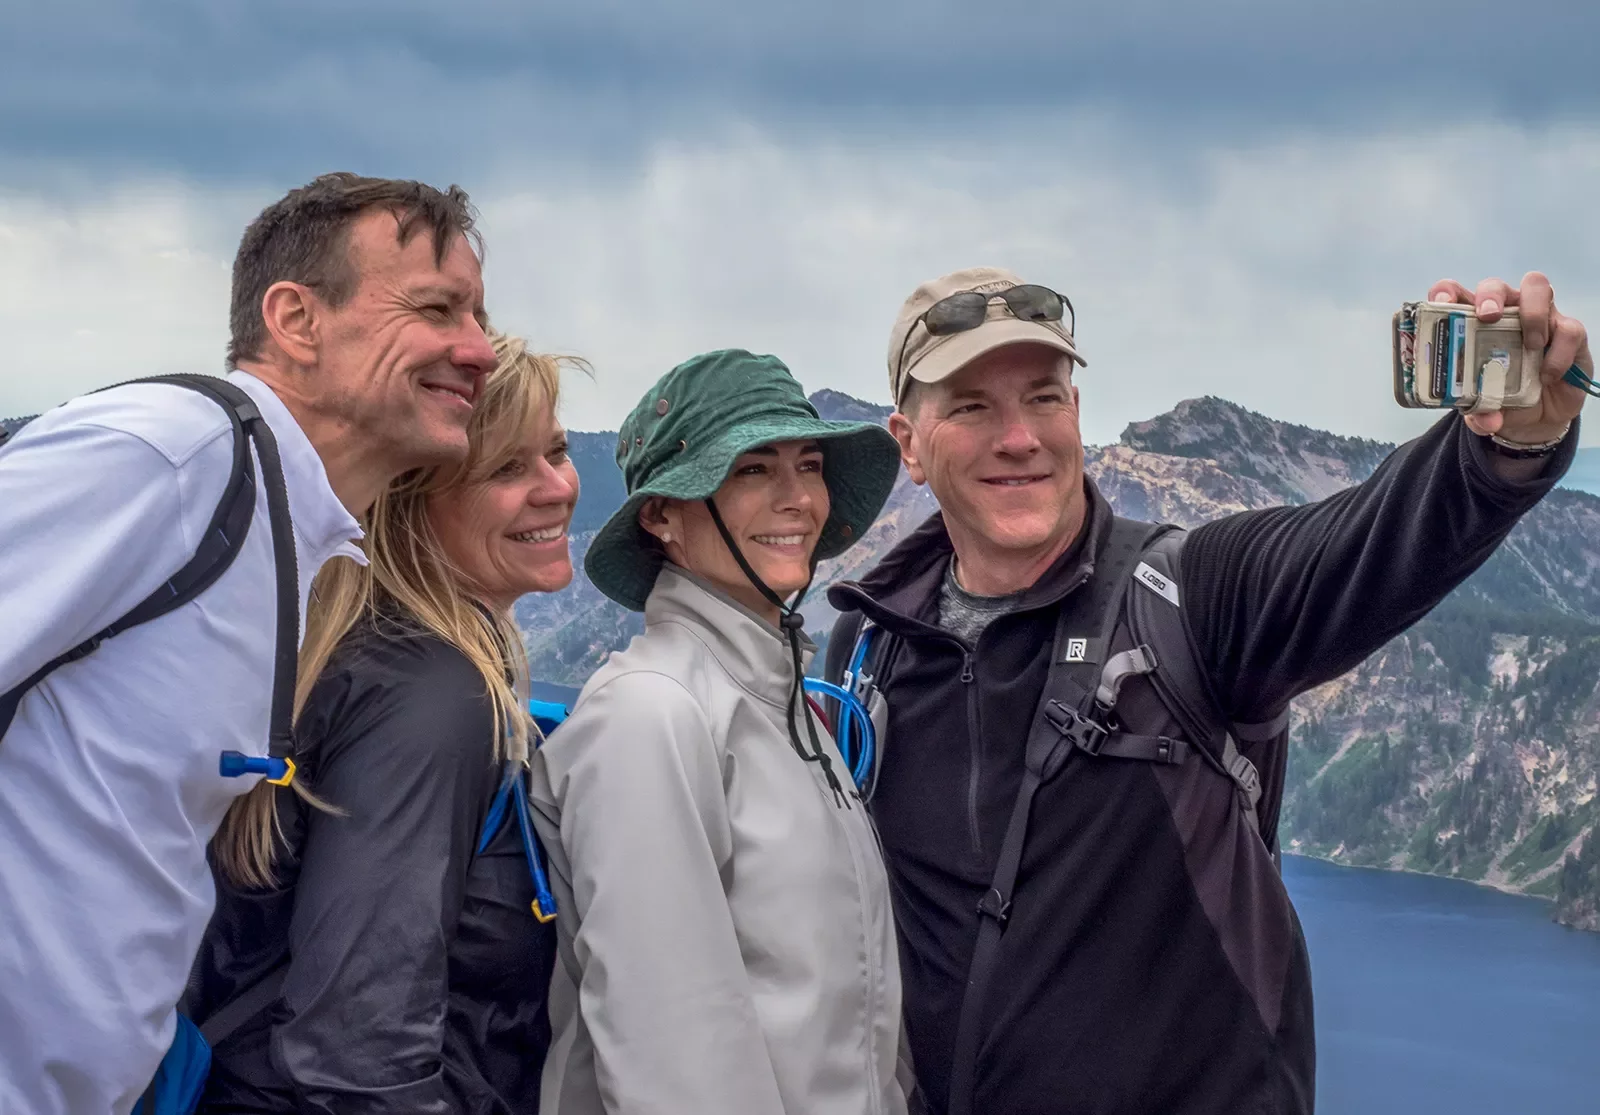 Four guests taking a selfie, lake and rocky cliffs in background.